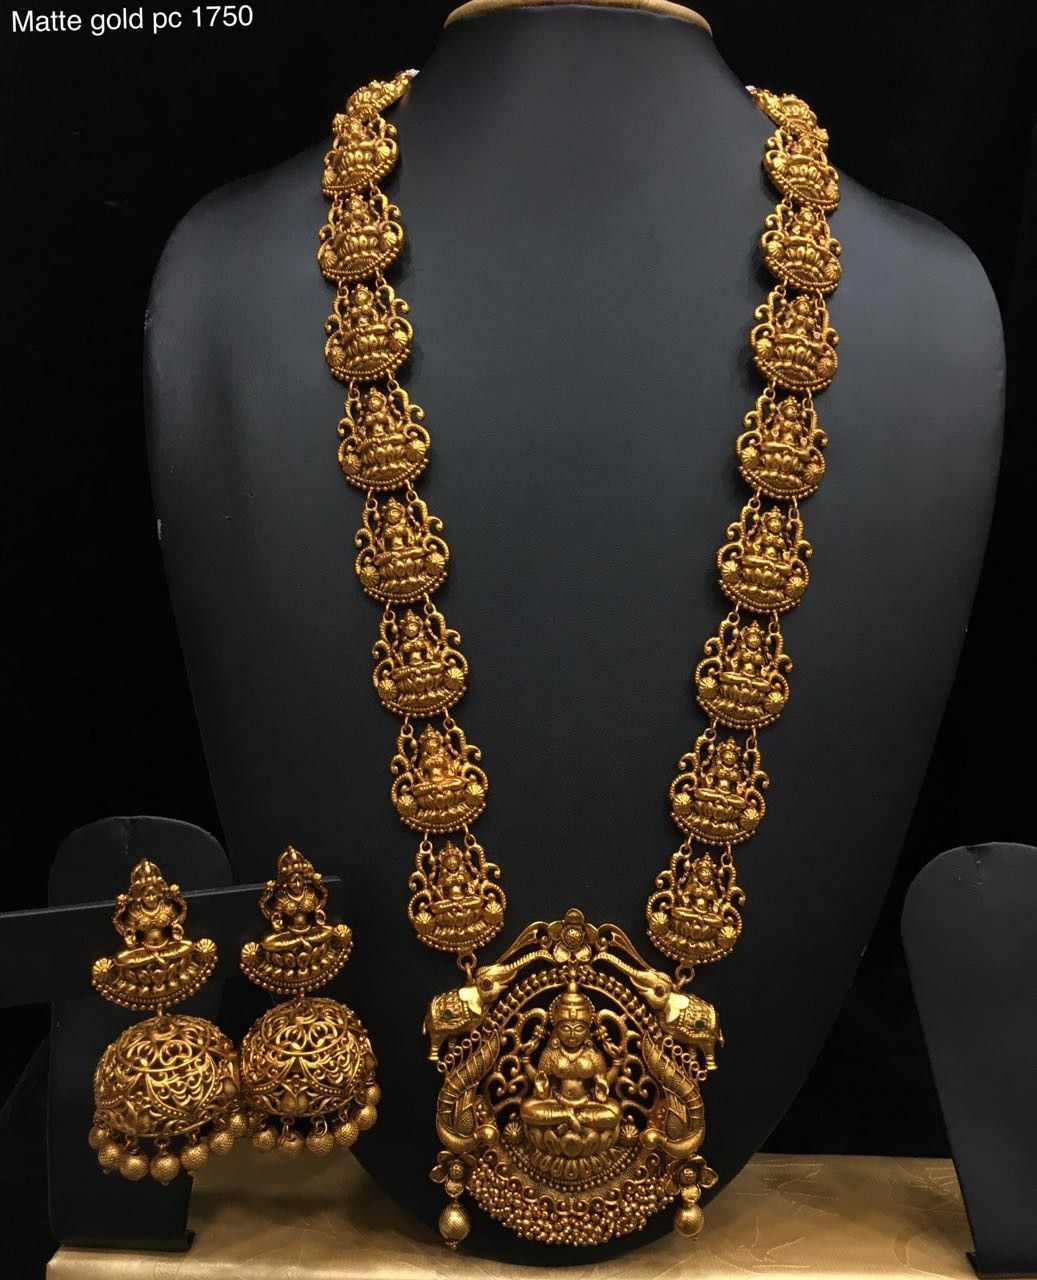 Gold Temple Jewellery: Adorn Yourself with Traditional and Elegant Gold Temple Jewellery